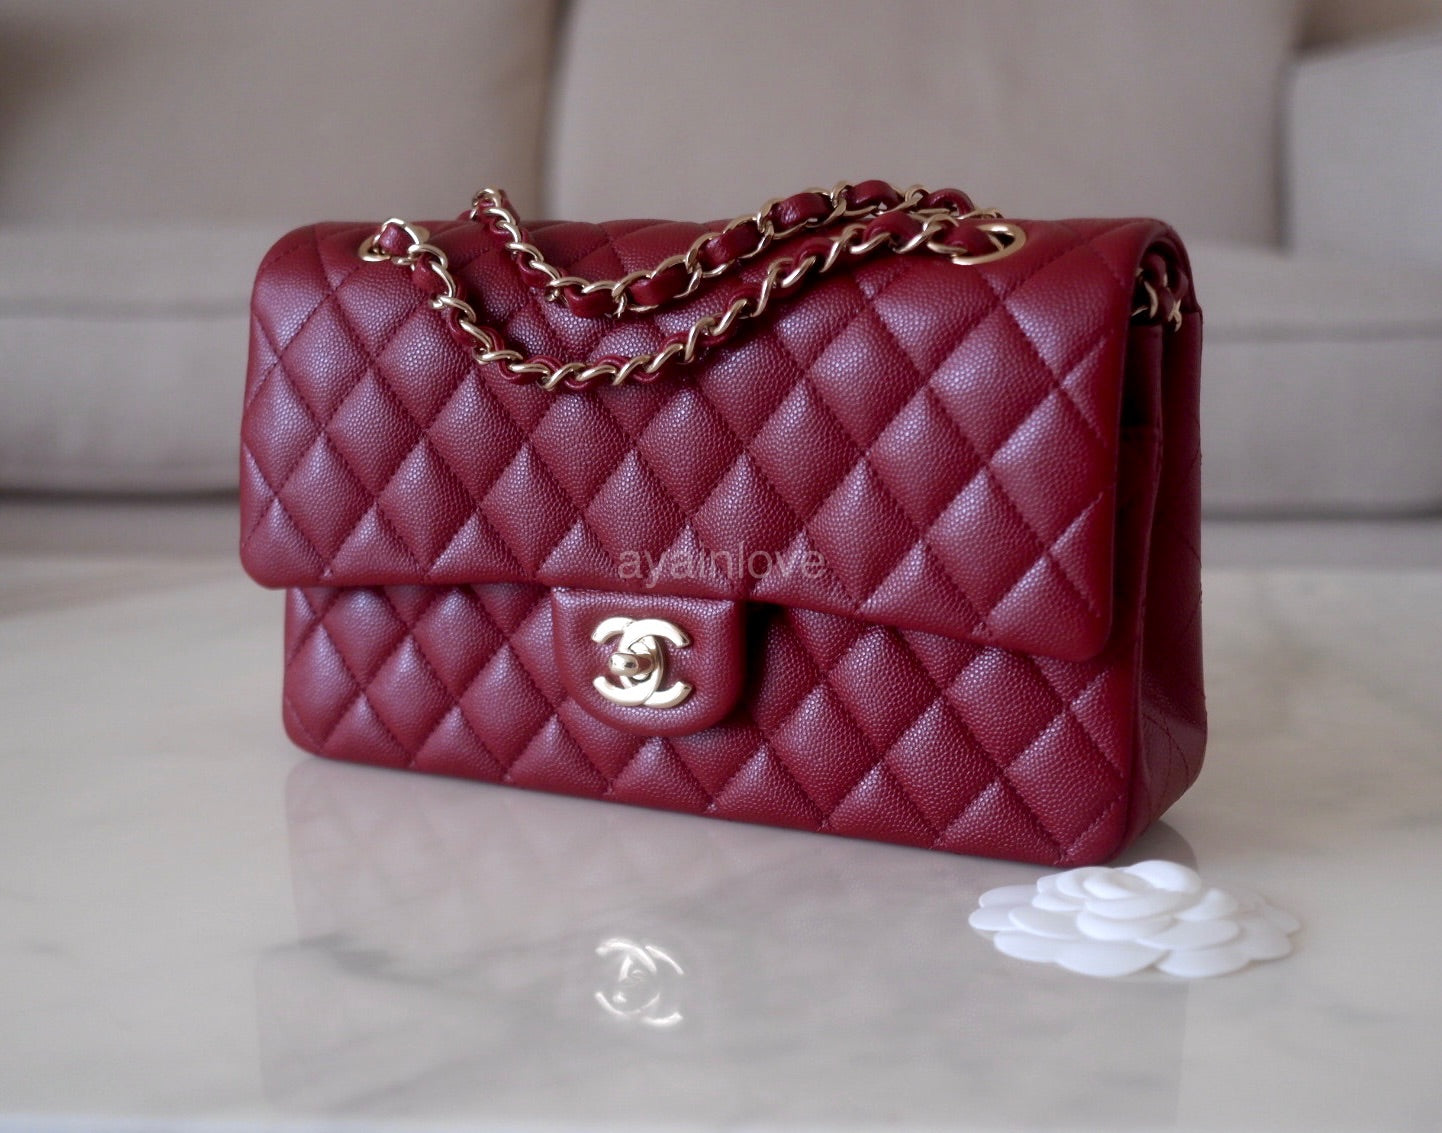 Chanel Quilted Mini Rectangular Flap Pearly Pink Caviar Gold Hardware –  Coco Approved Studio